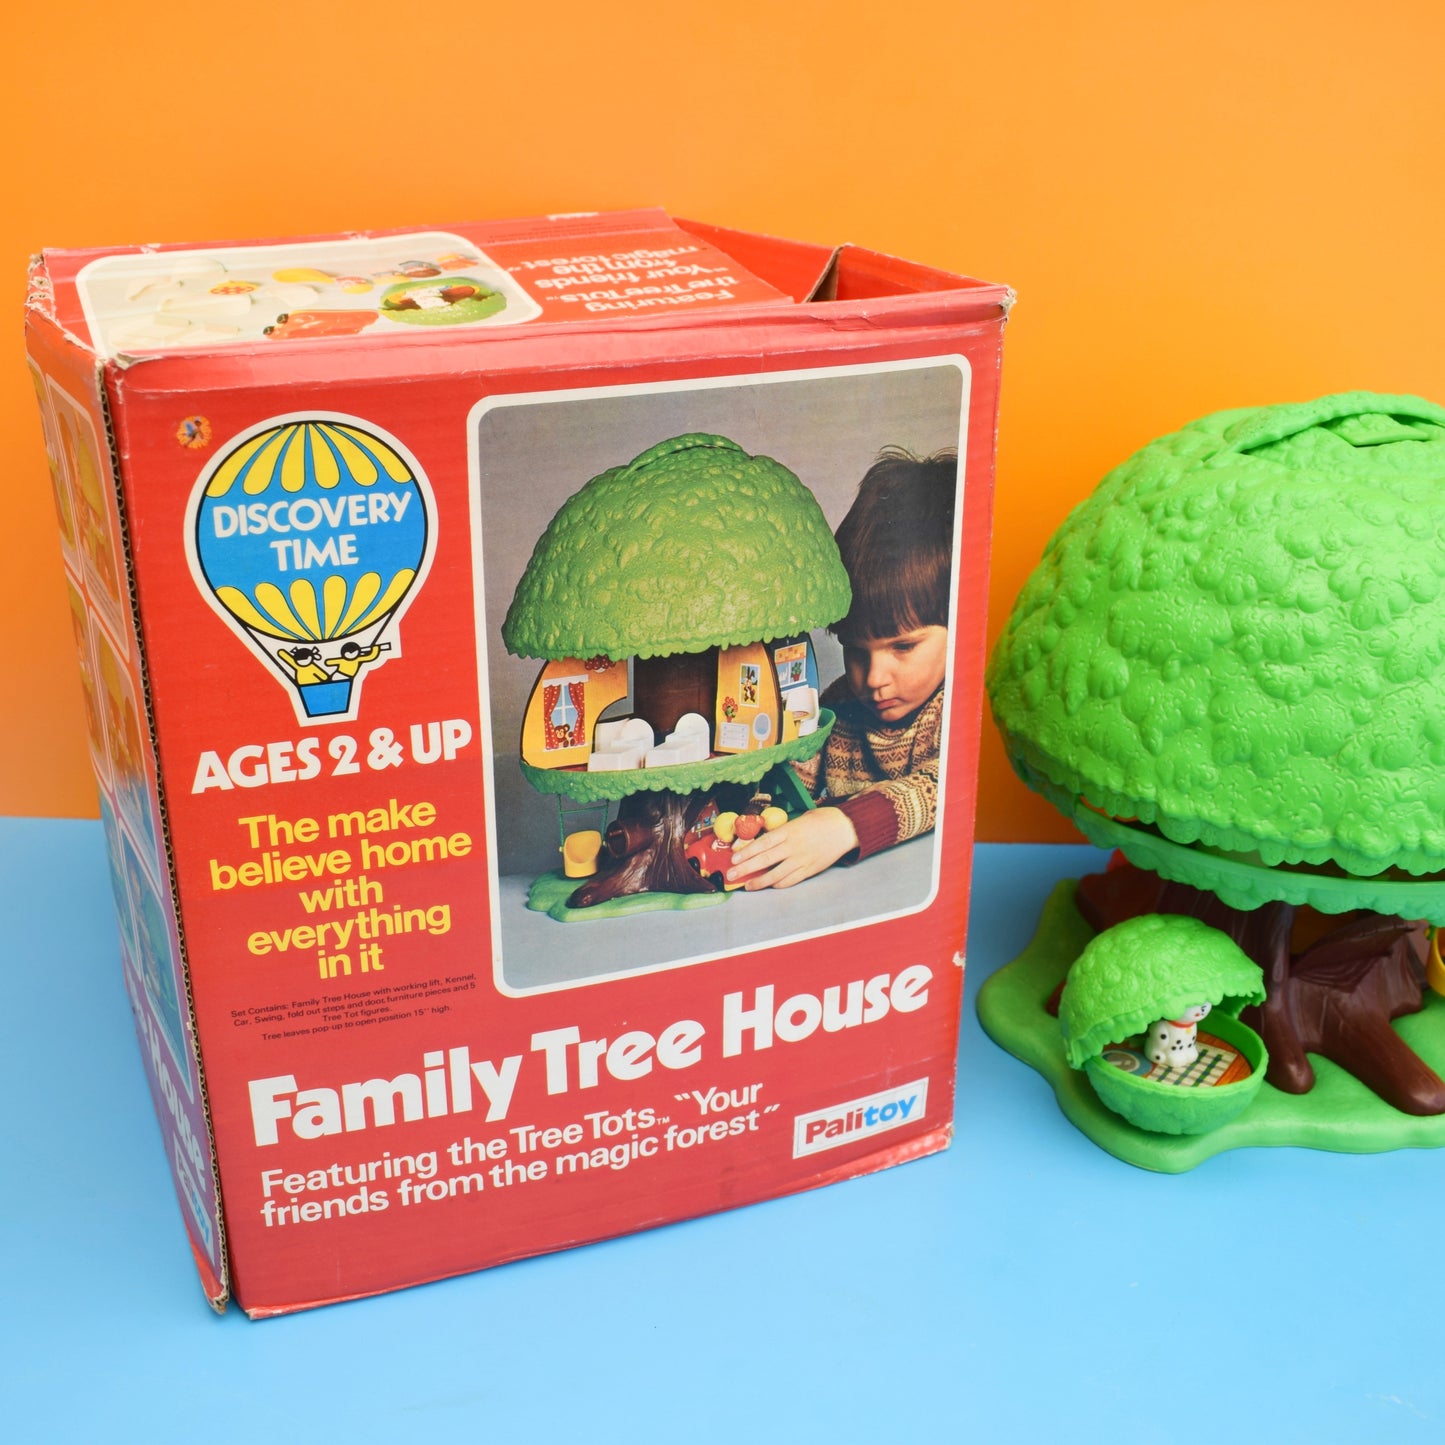 Vintage 1980s Boxed Palitoy Family Tree House